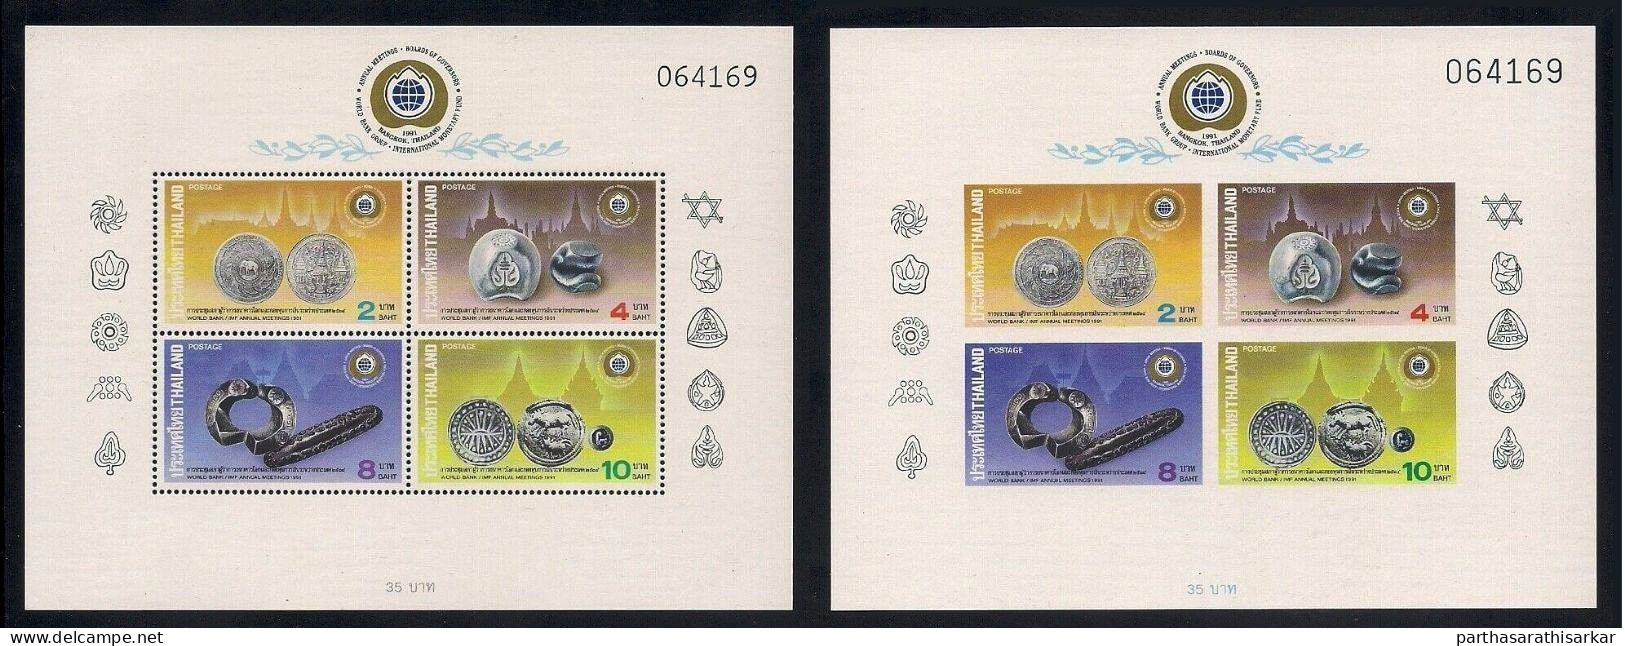 THAILAND 1991 ANCIENT COINAGE COINS PERF IMPERF SAME NO MINIATURE SHEET MS SET MNH - Coins